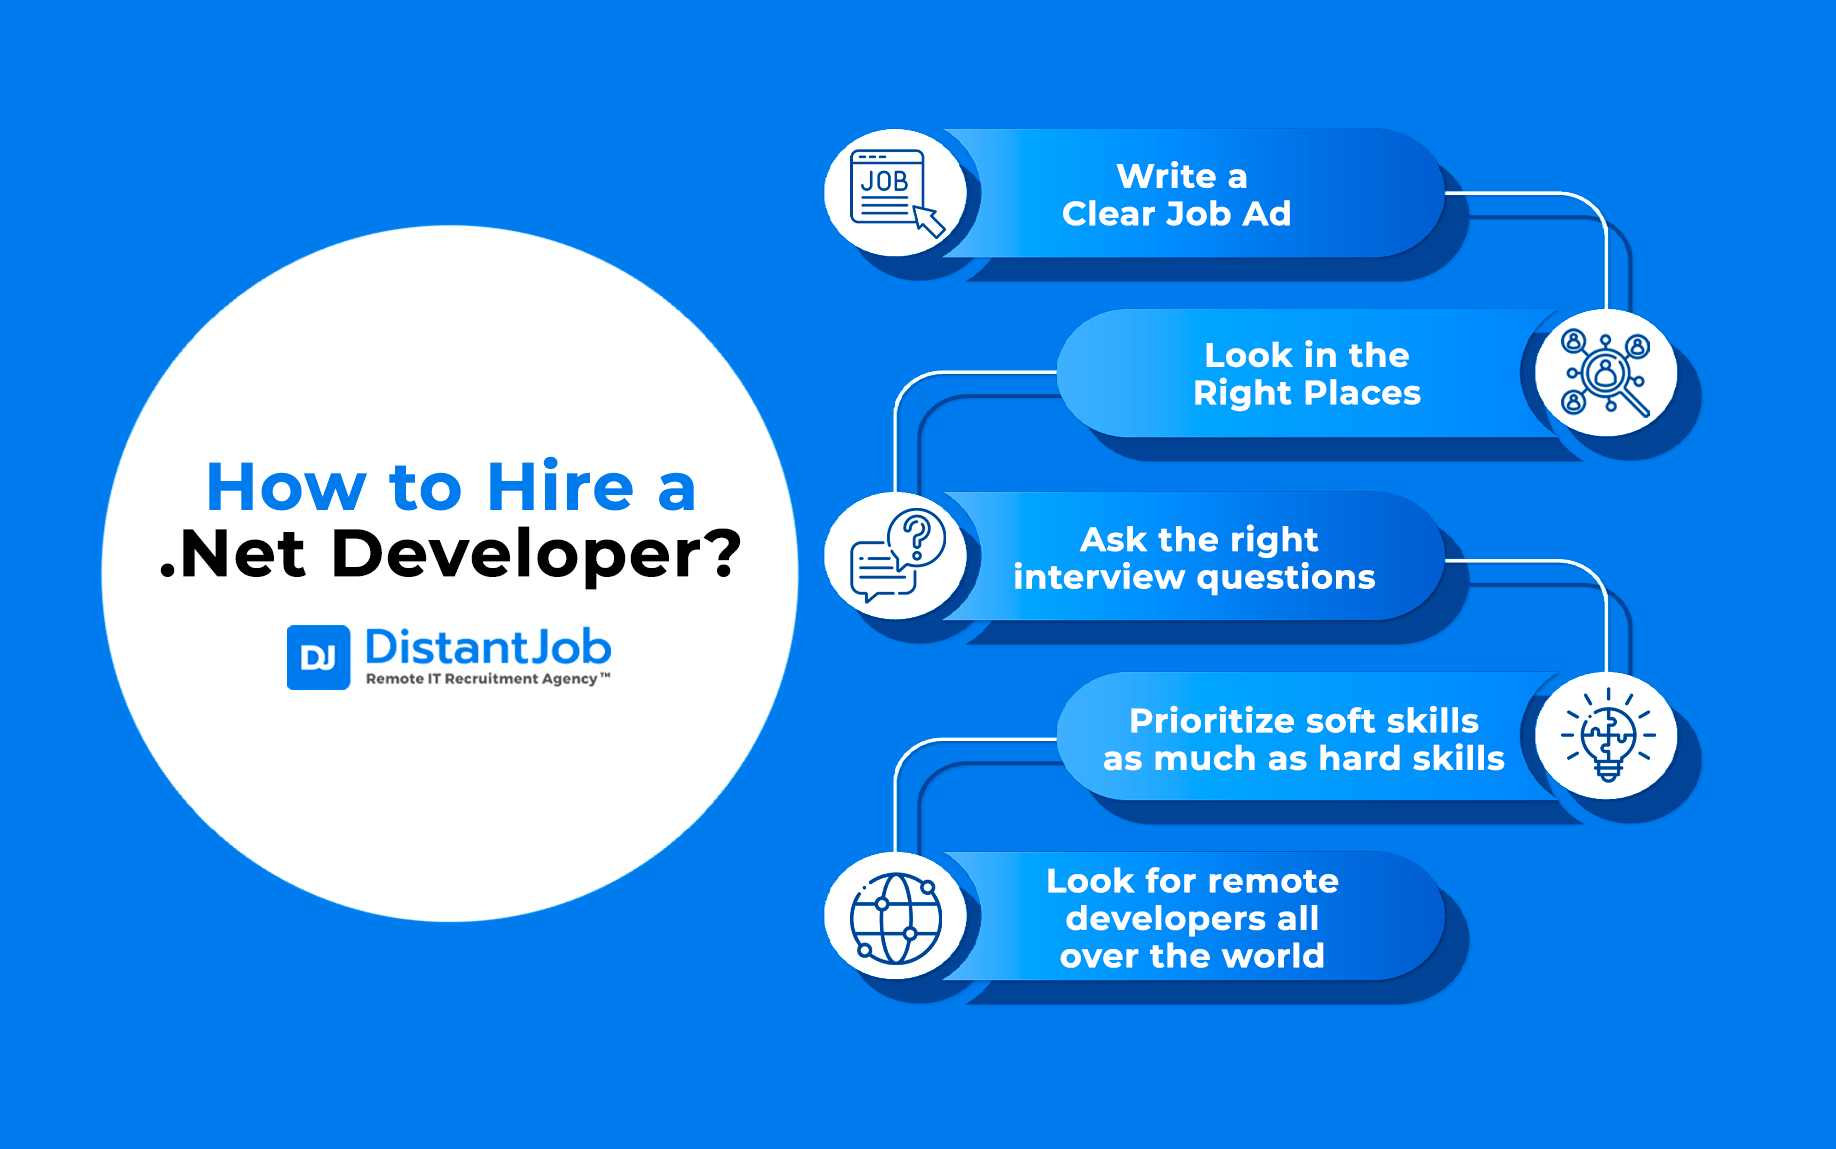 How to Hire a .NET Developer